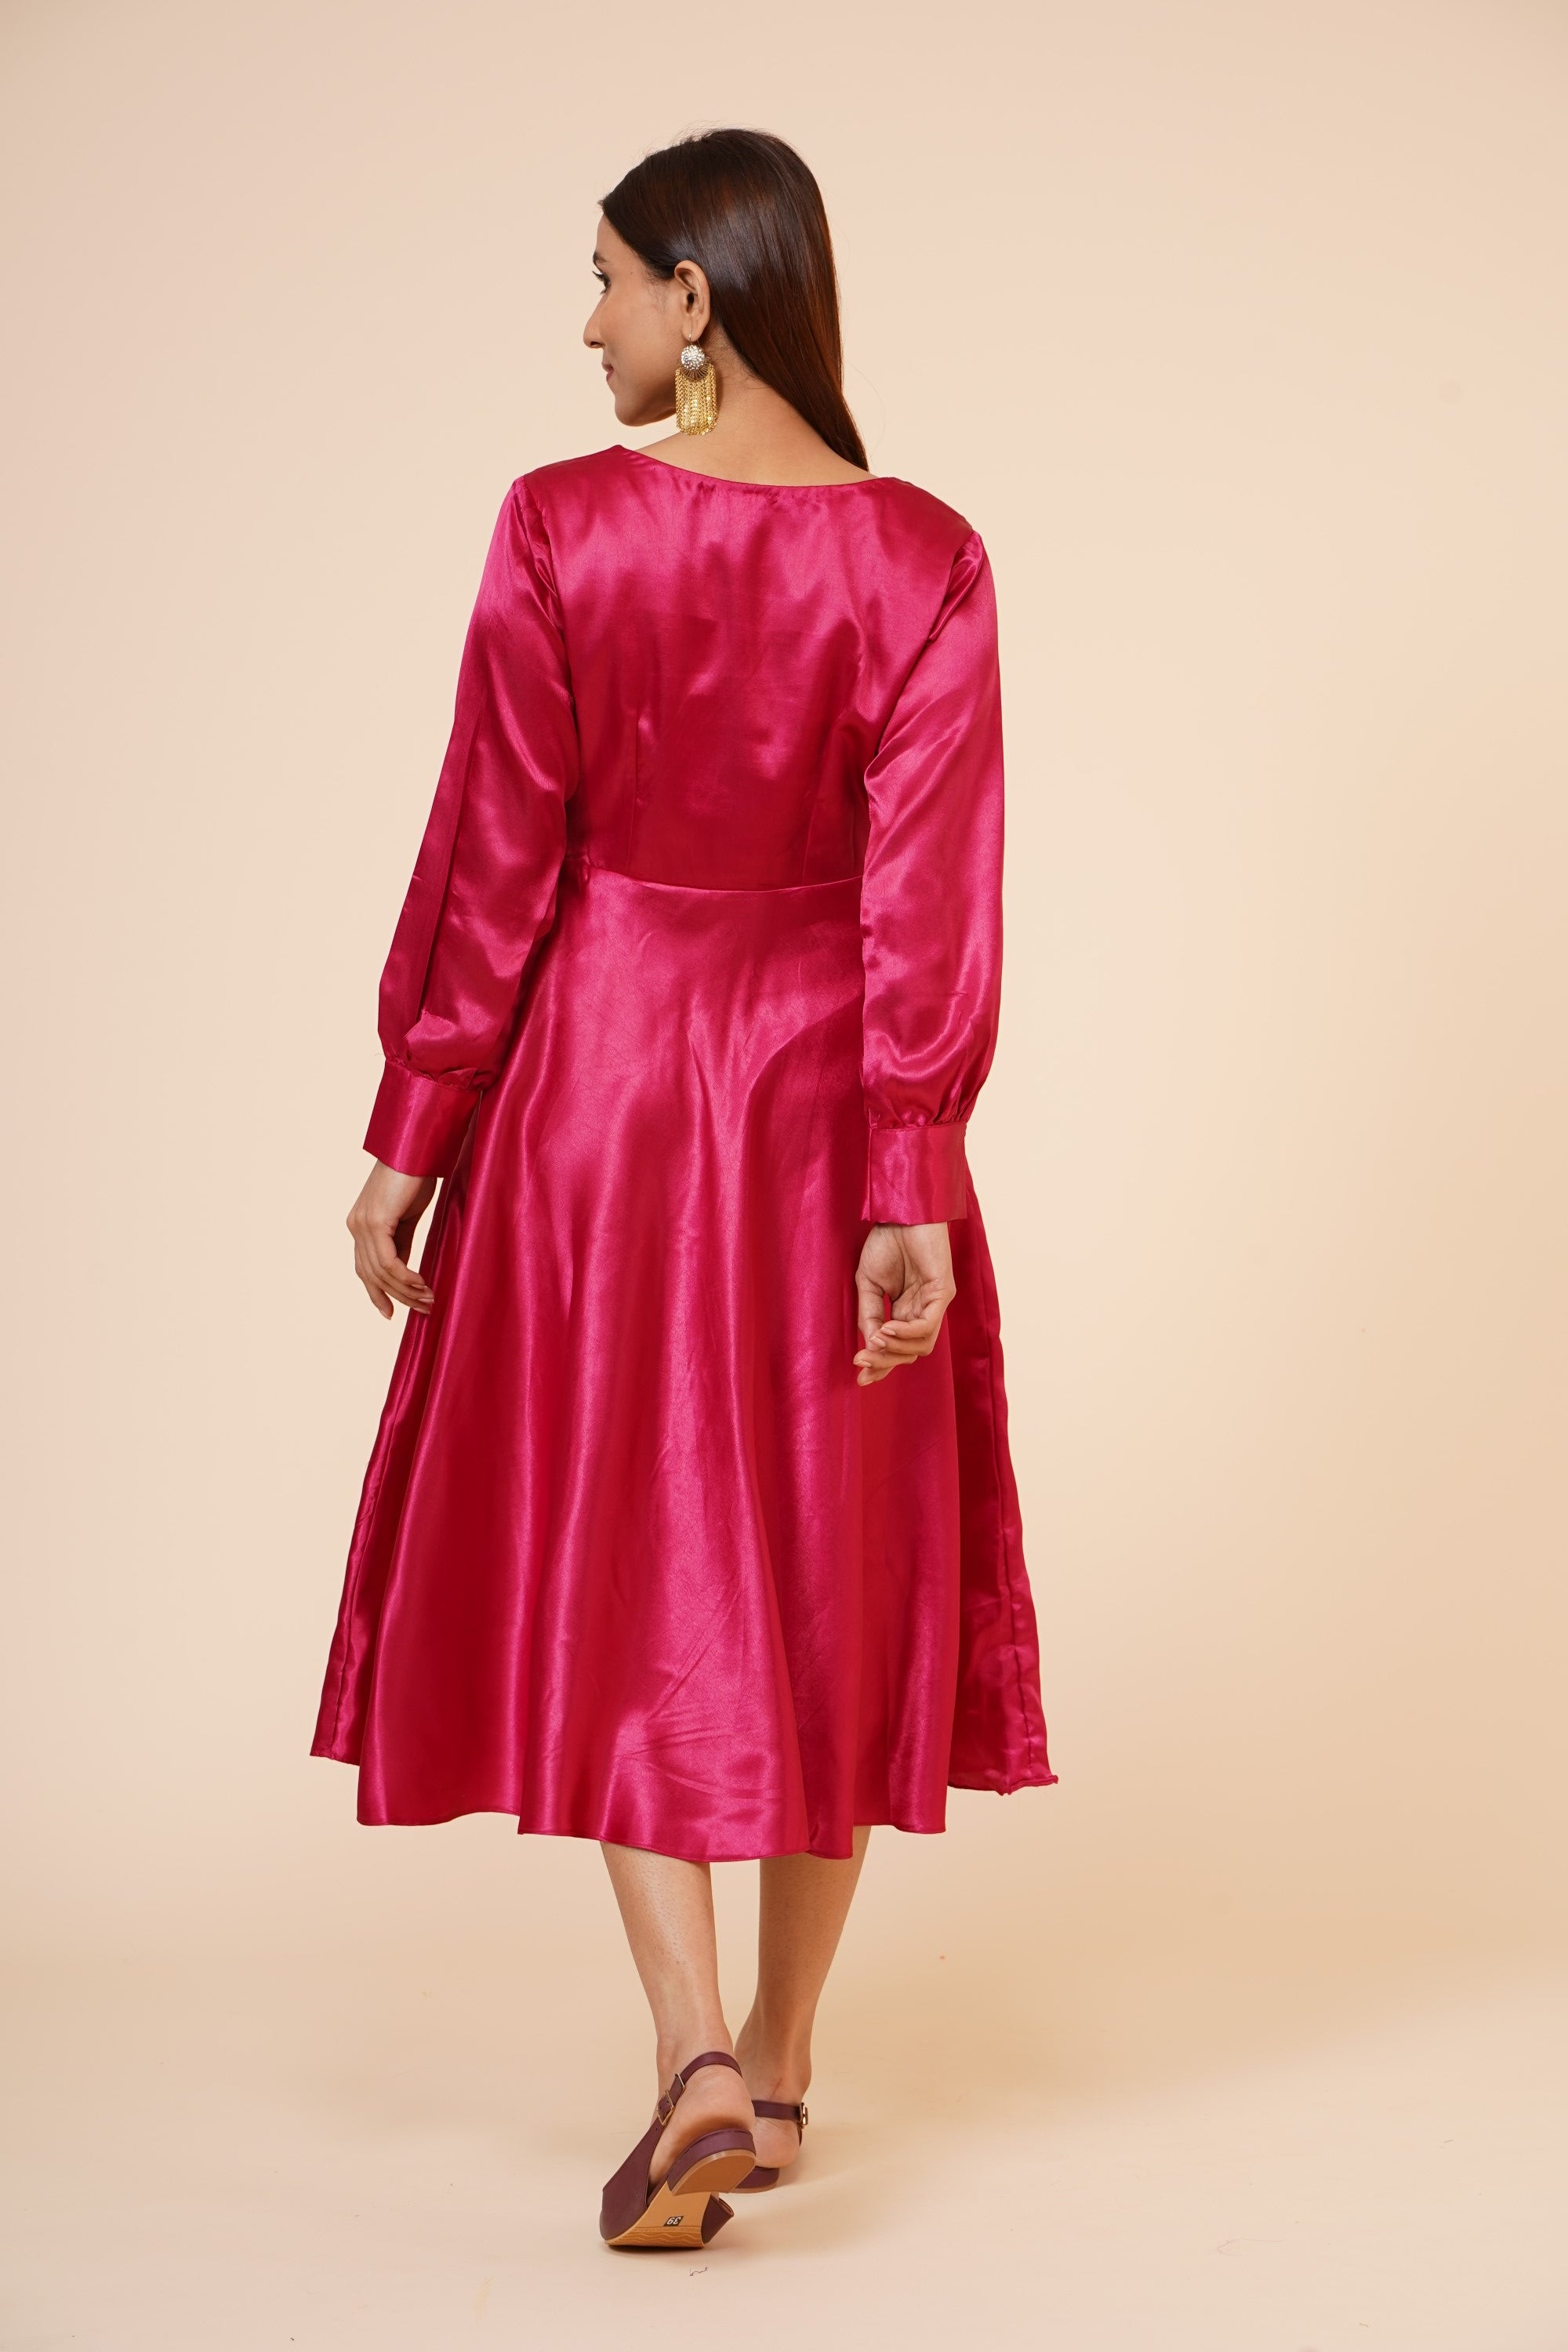 Women's Empire Line With Cuff Satin Wrap Dress Maroon - MIRACOLOS by Ruchi